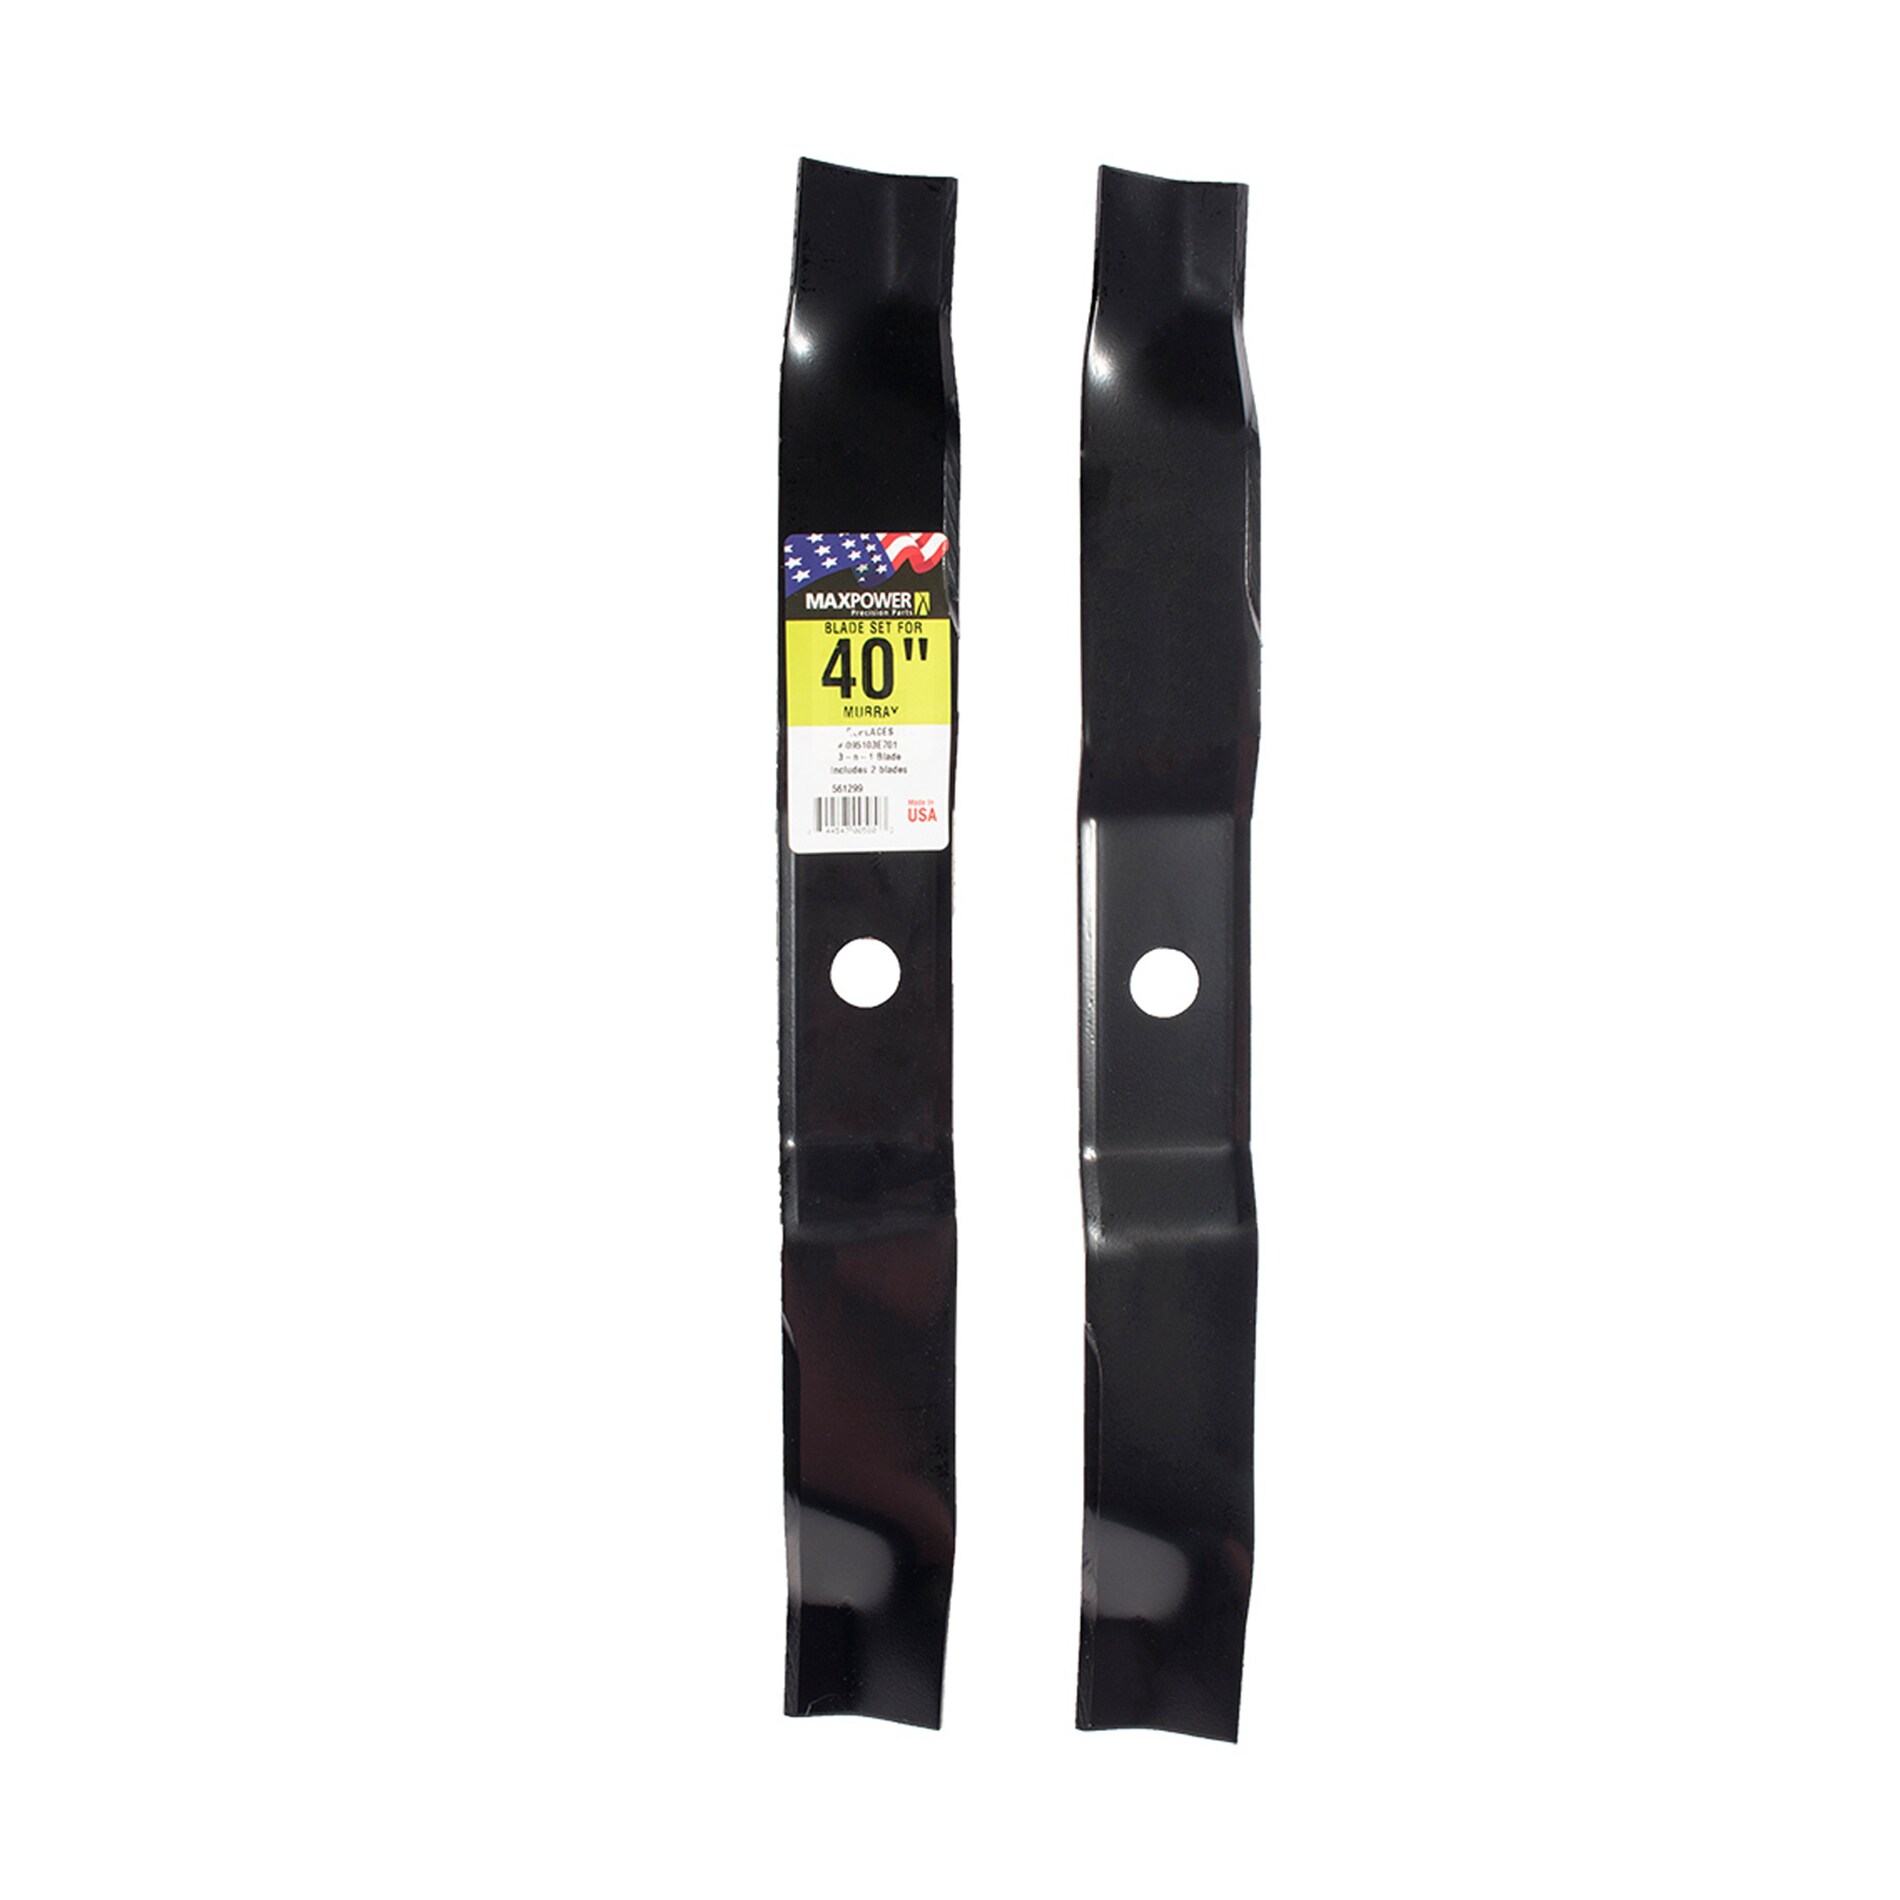 for Murray #'s 56251E701  Multcher Mower Blades 40" Cut Takes 2 blades 